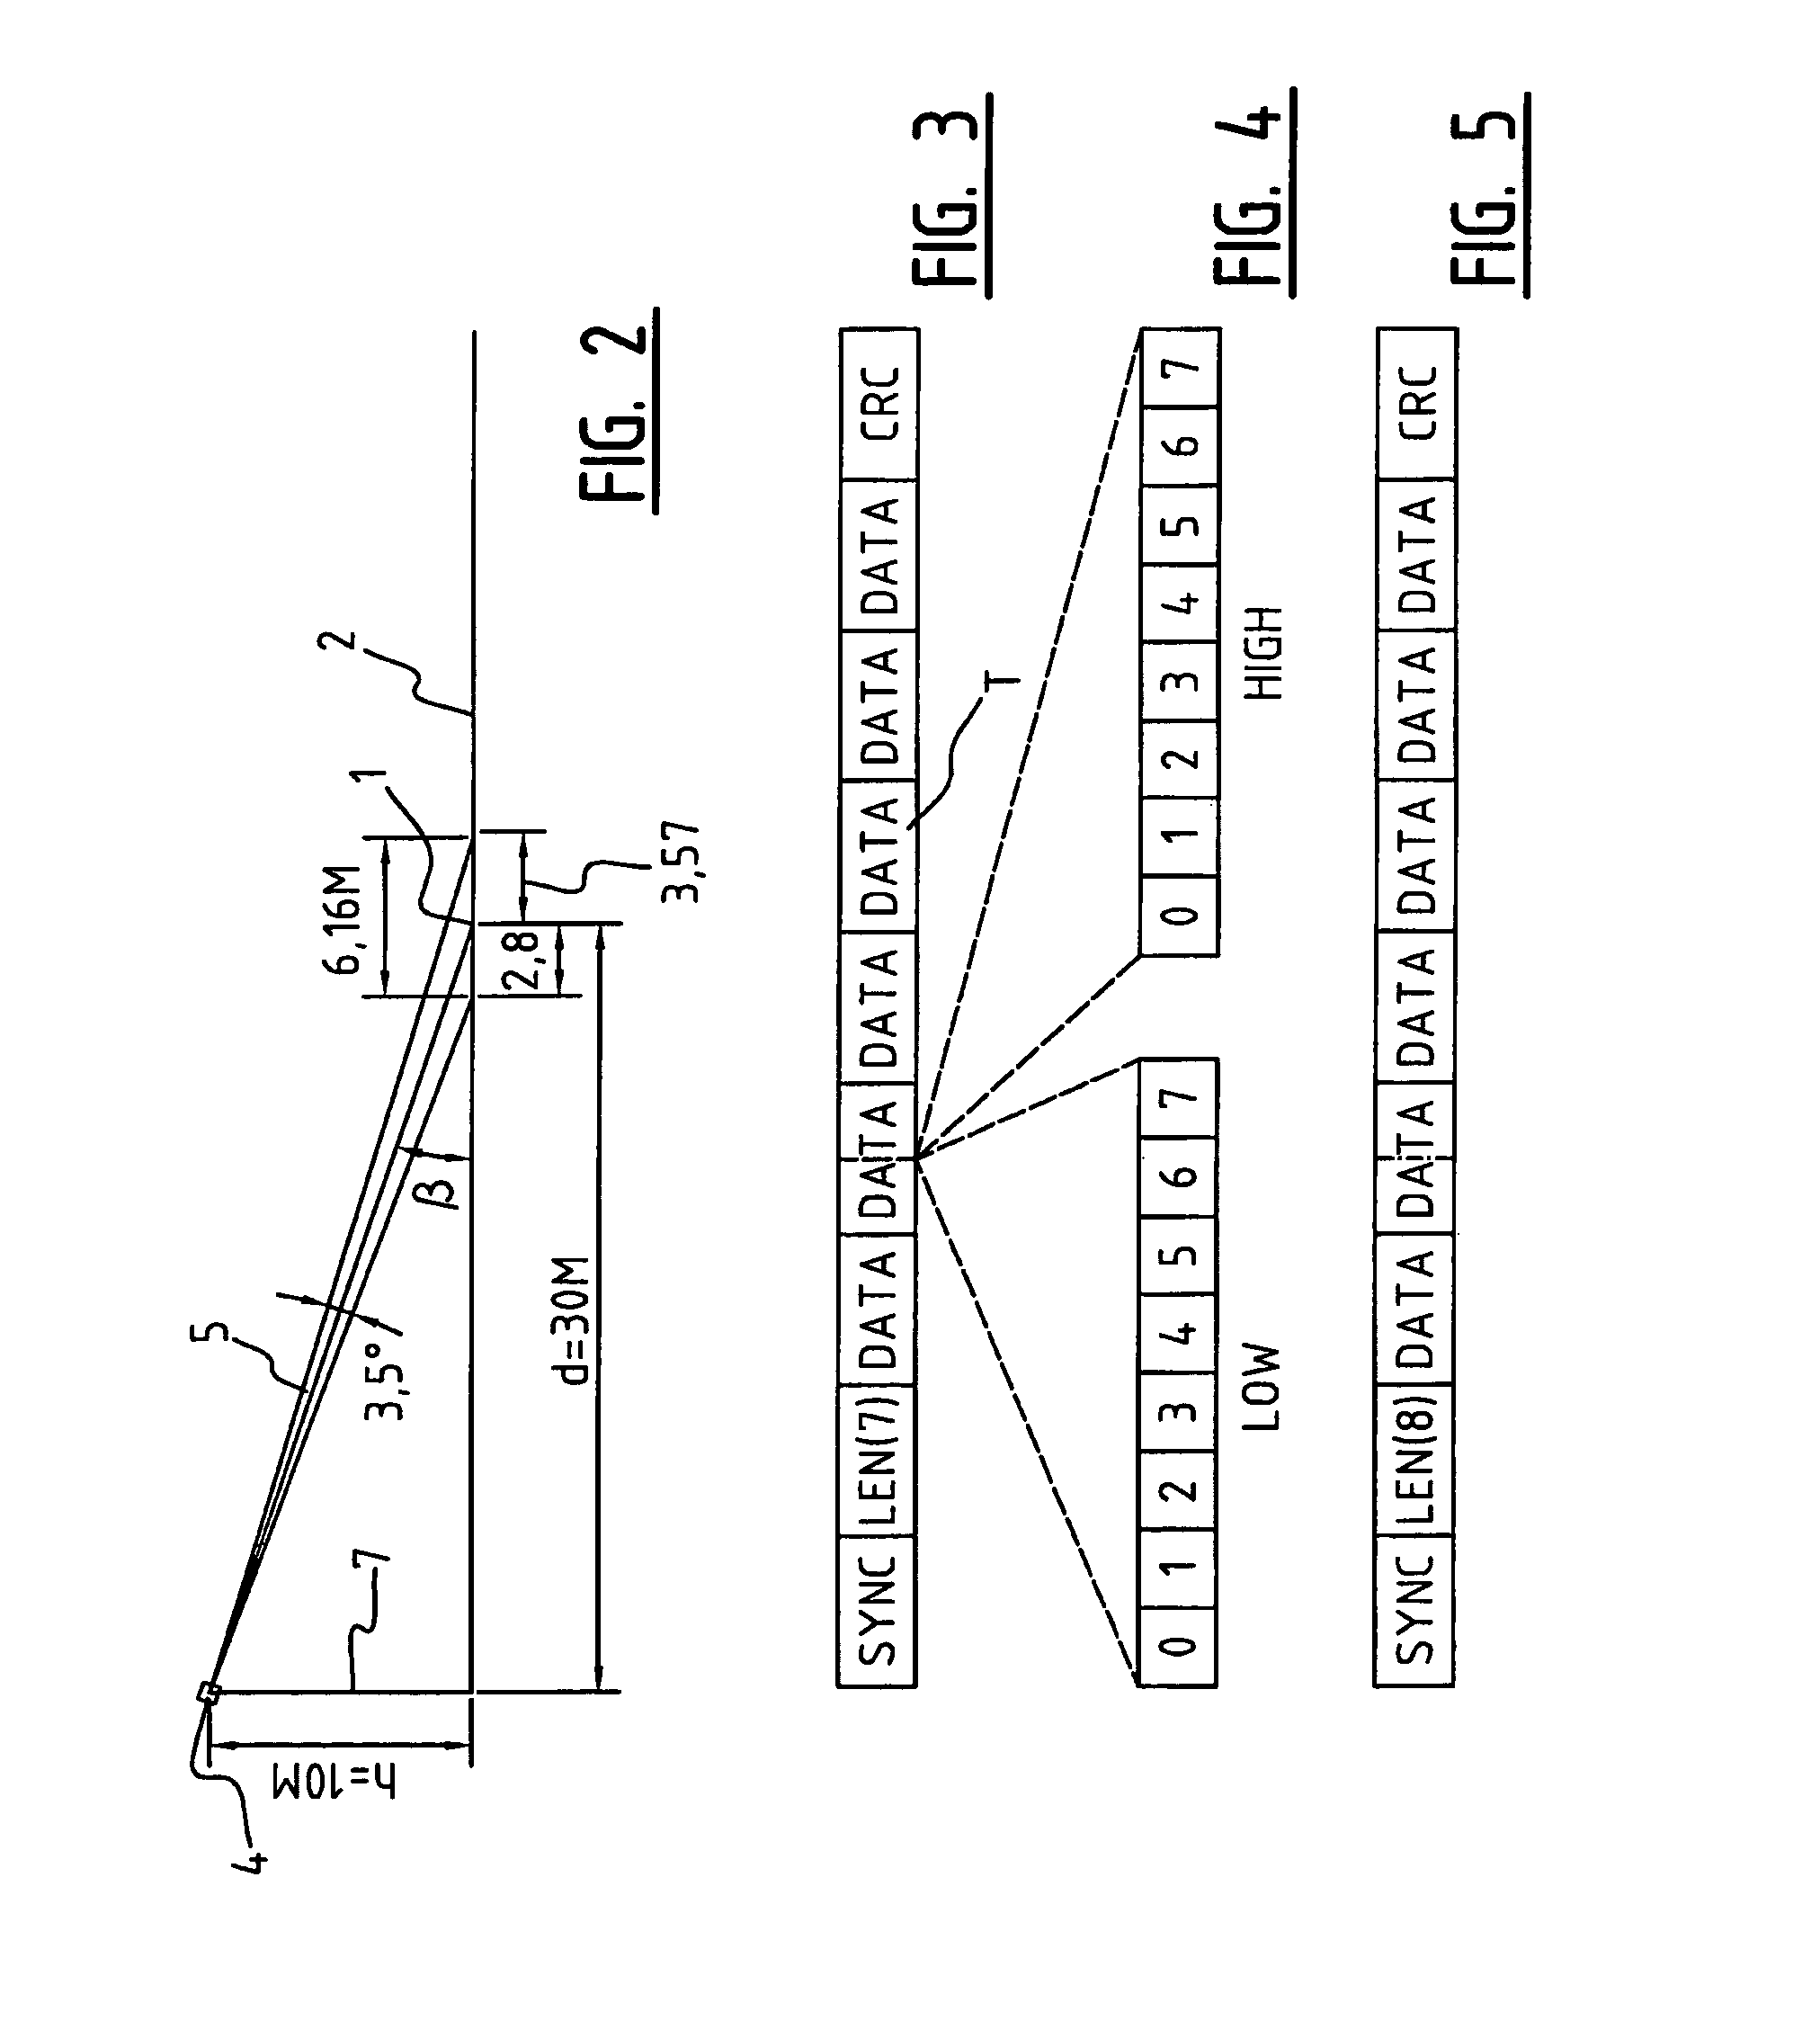 Method and system for detecting with radar the passage by a vehicle of a point for monitoring on a road